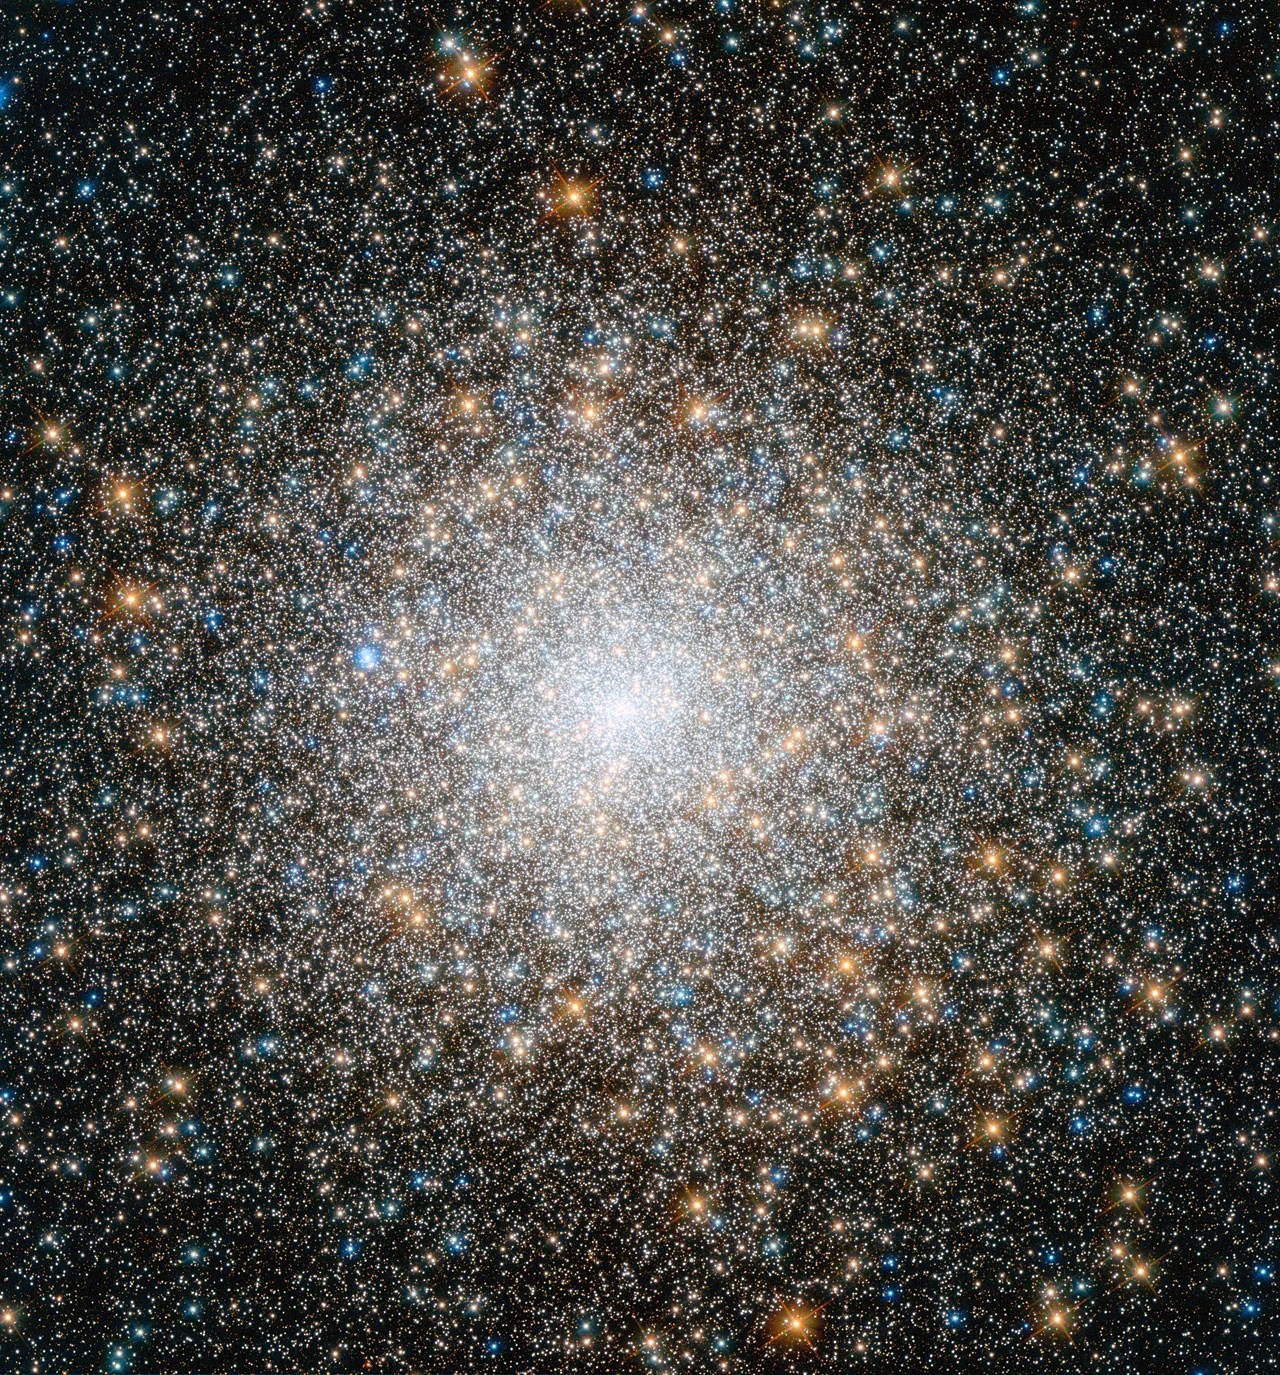 Hubble view of M15